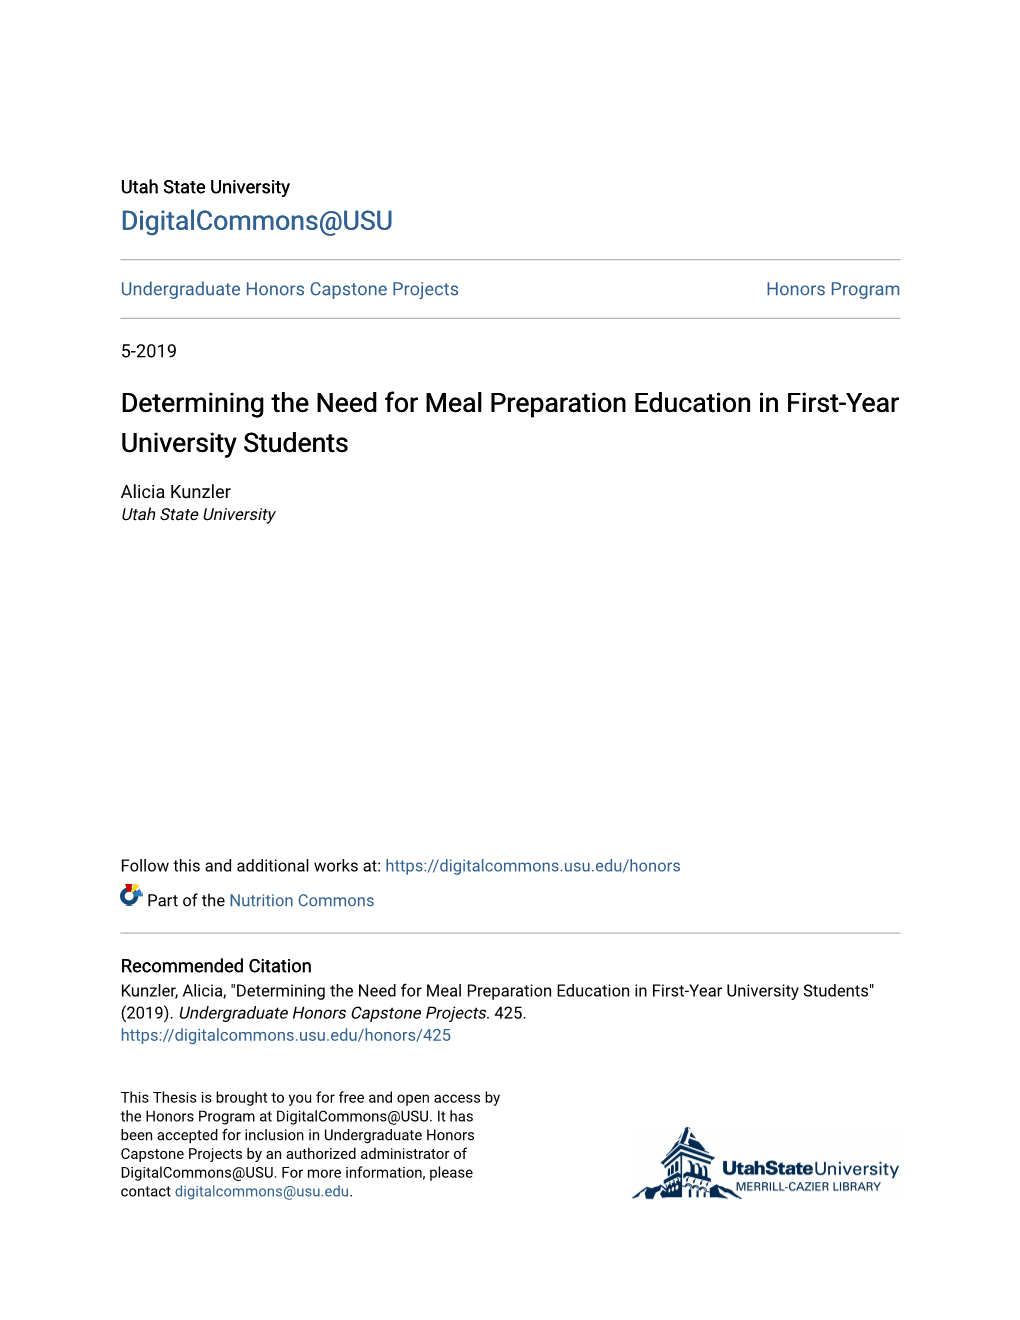 Determining the Need for Meal Preparation Education in First-Year University Students